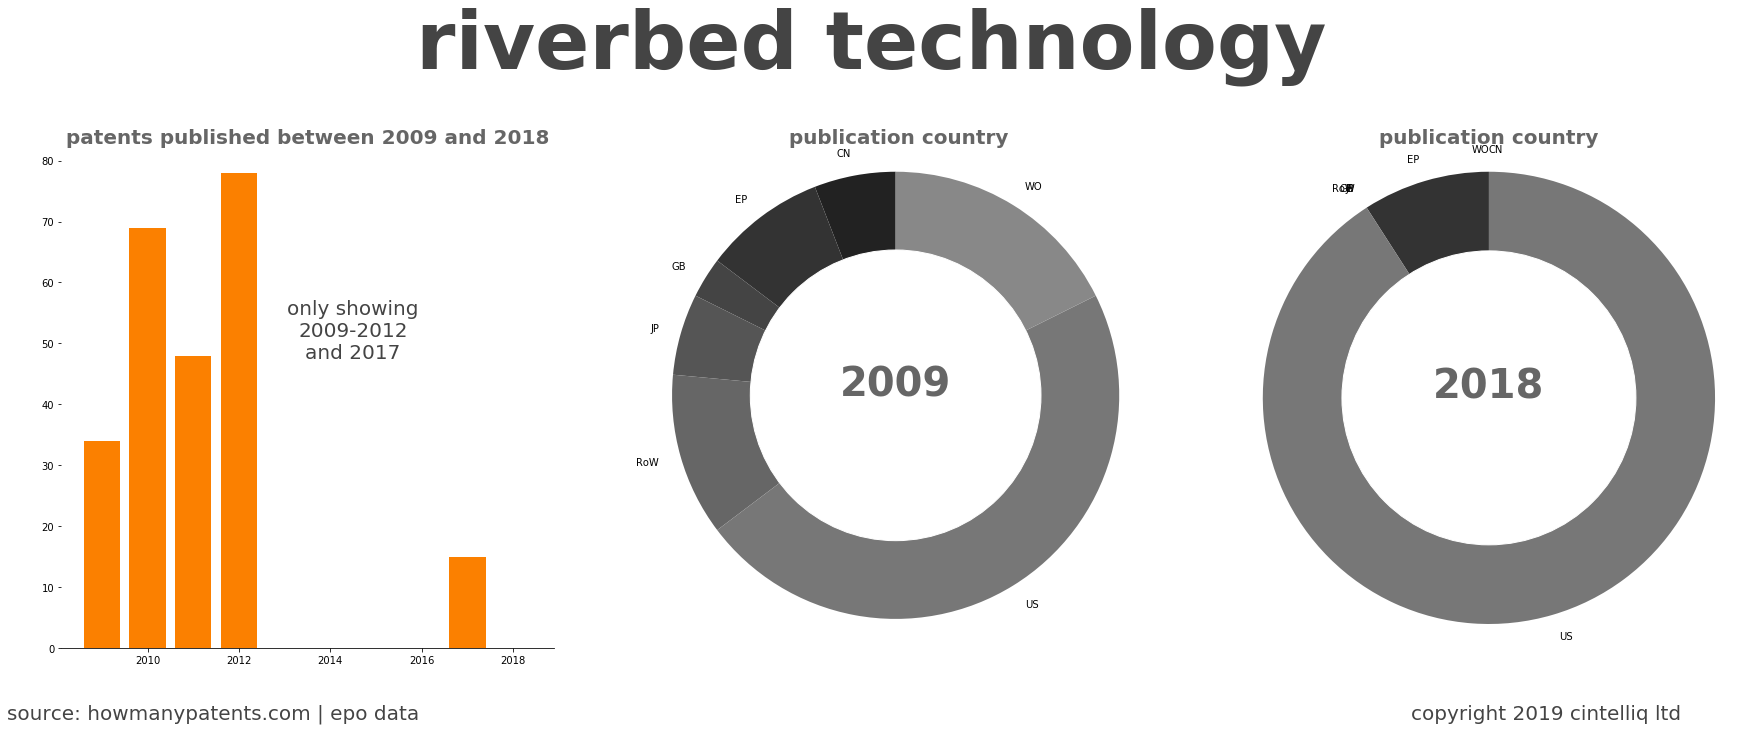 summary of patents for Riverbed Technology